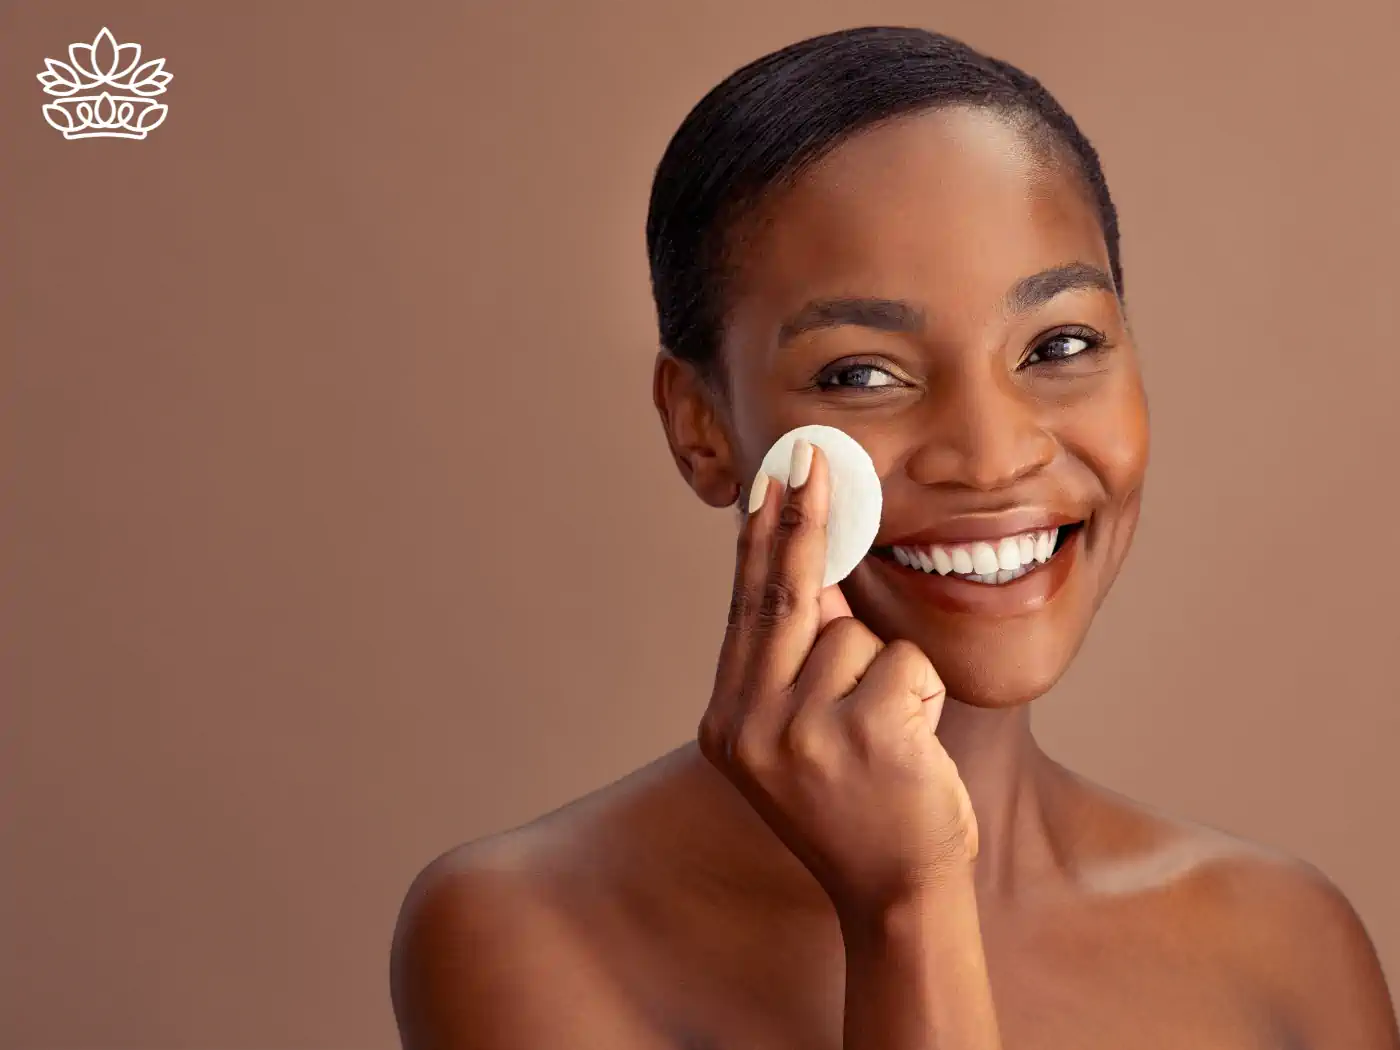  Woman smiling while holding a cotton pad to her face, symbolizing a gentle skincare regimen. Fabulous Flowers and Gifts.